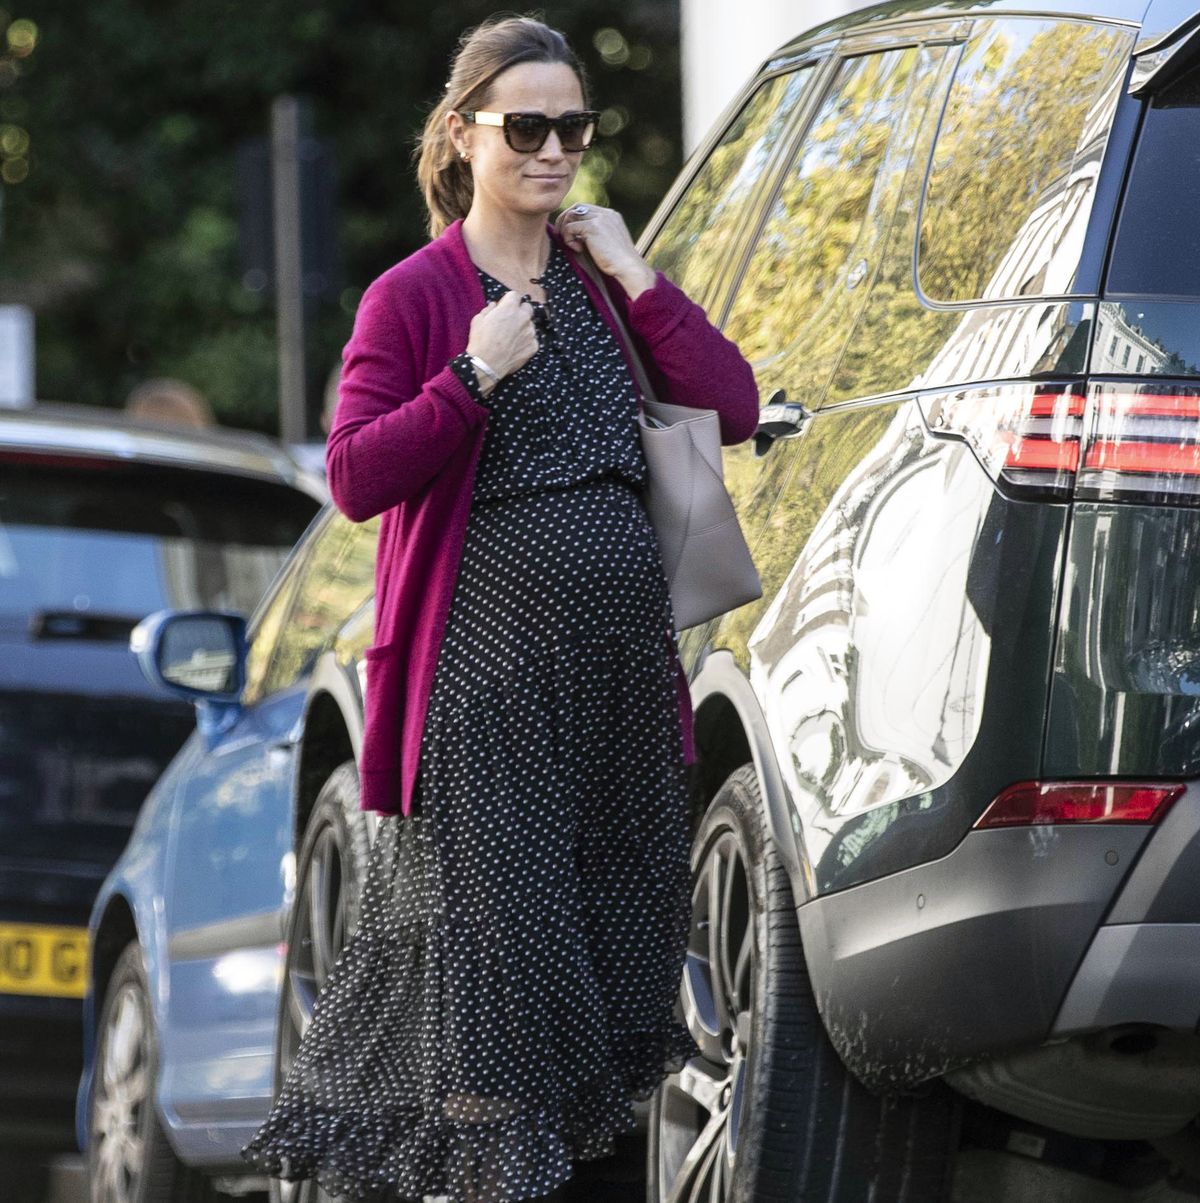 EXCLUSIVE: Pippa Middleton Shows Off Her Fashionable Maternity Style while Running Errands in London